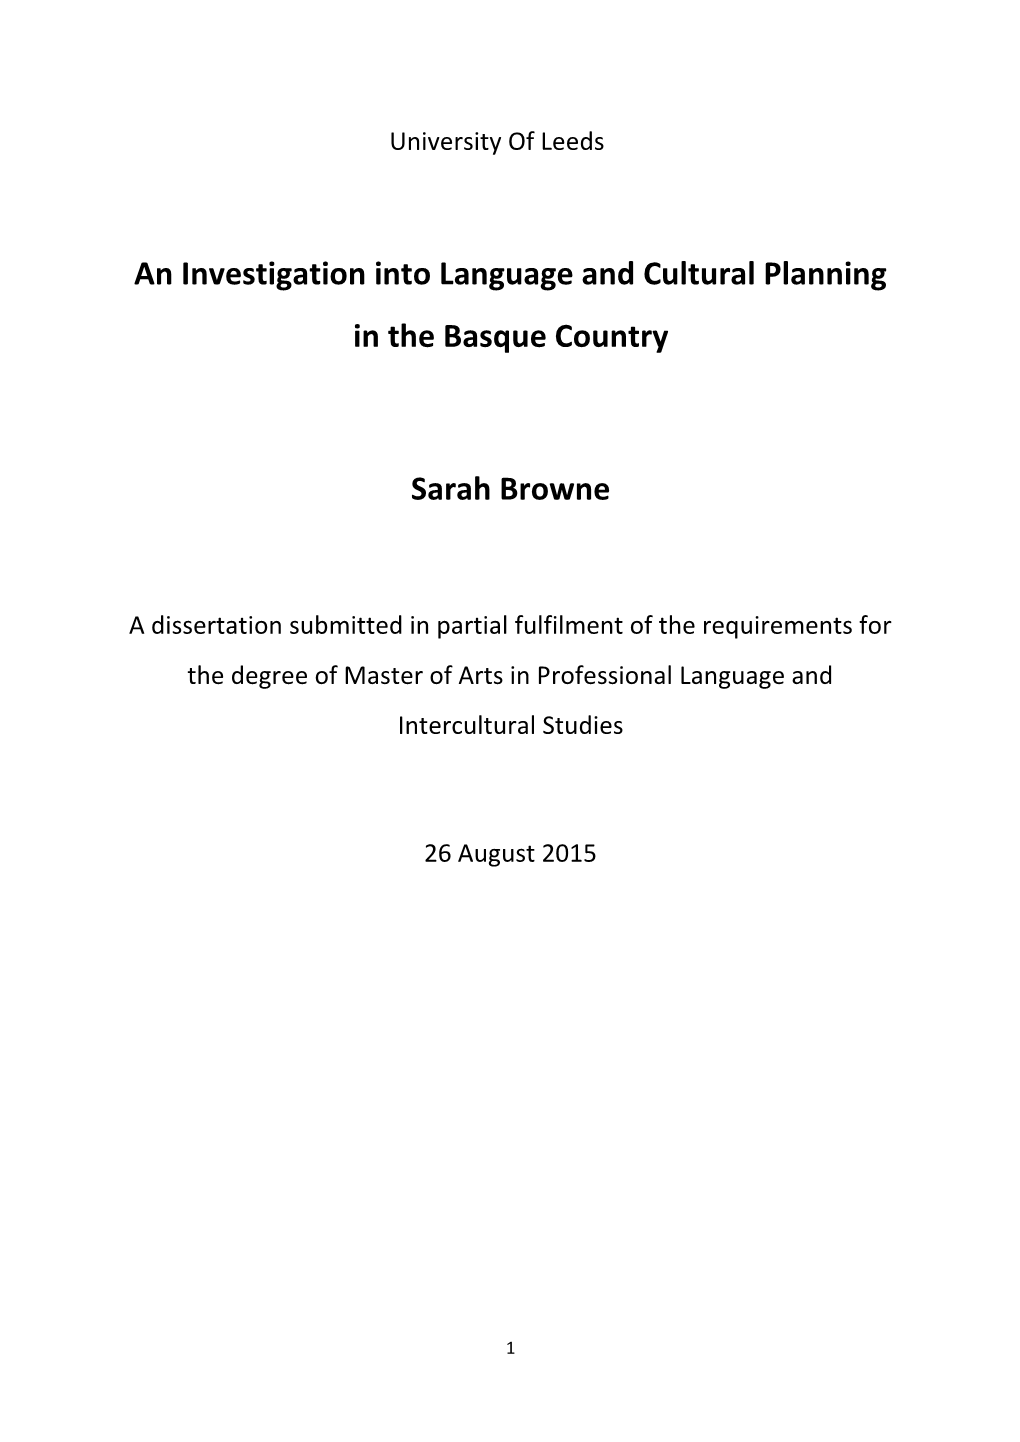 An Investigation Into Language and Cultural Planning in the Basque Country